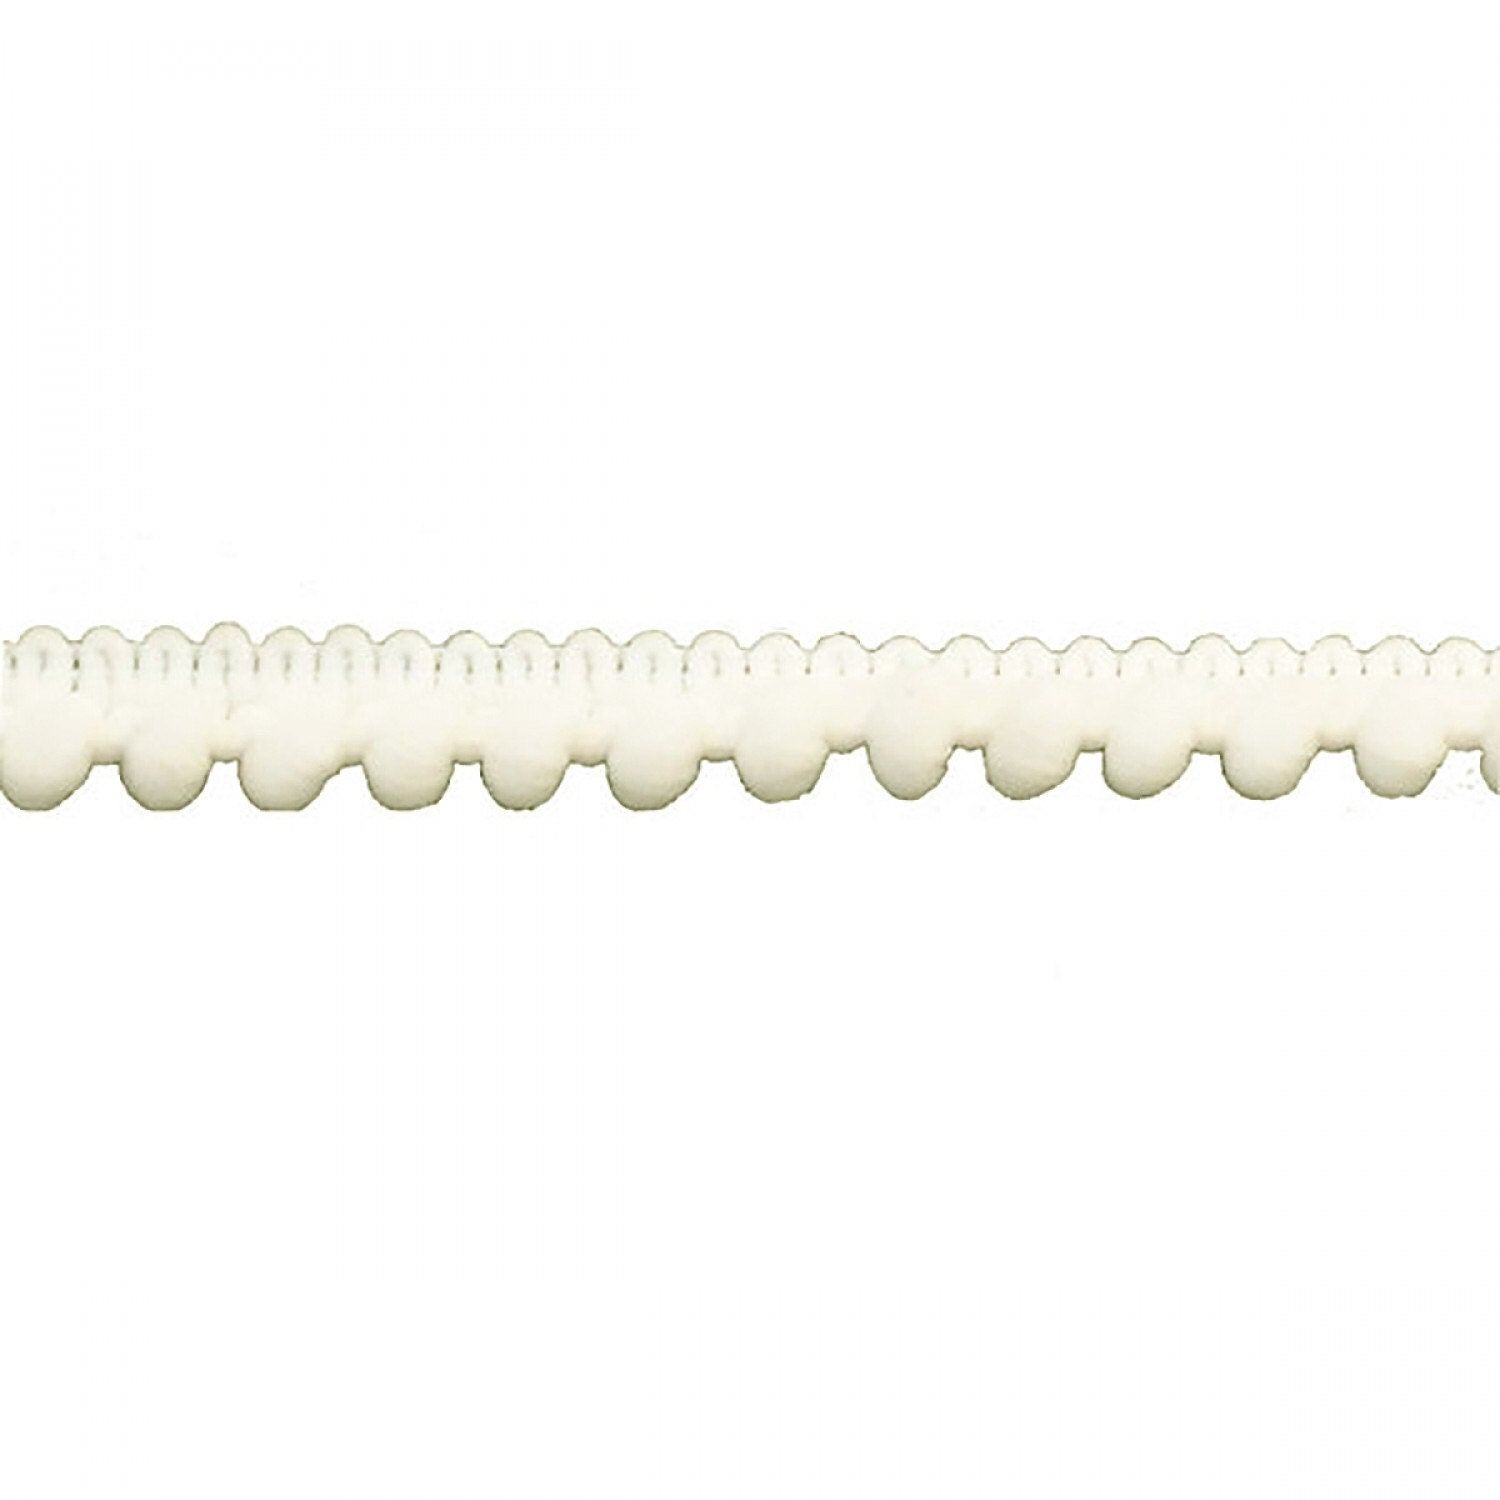 Ivory 3/8 inch Pompom trim - 3/16 inch ball size - sold by the yard